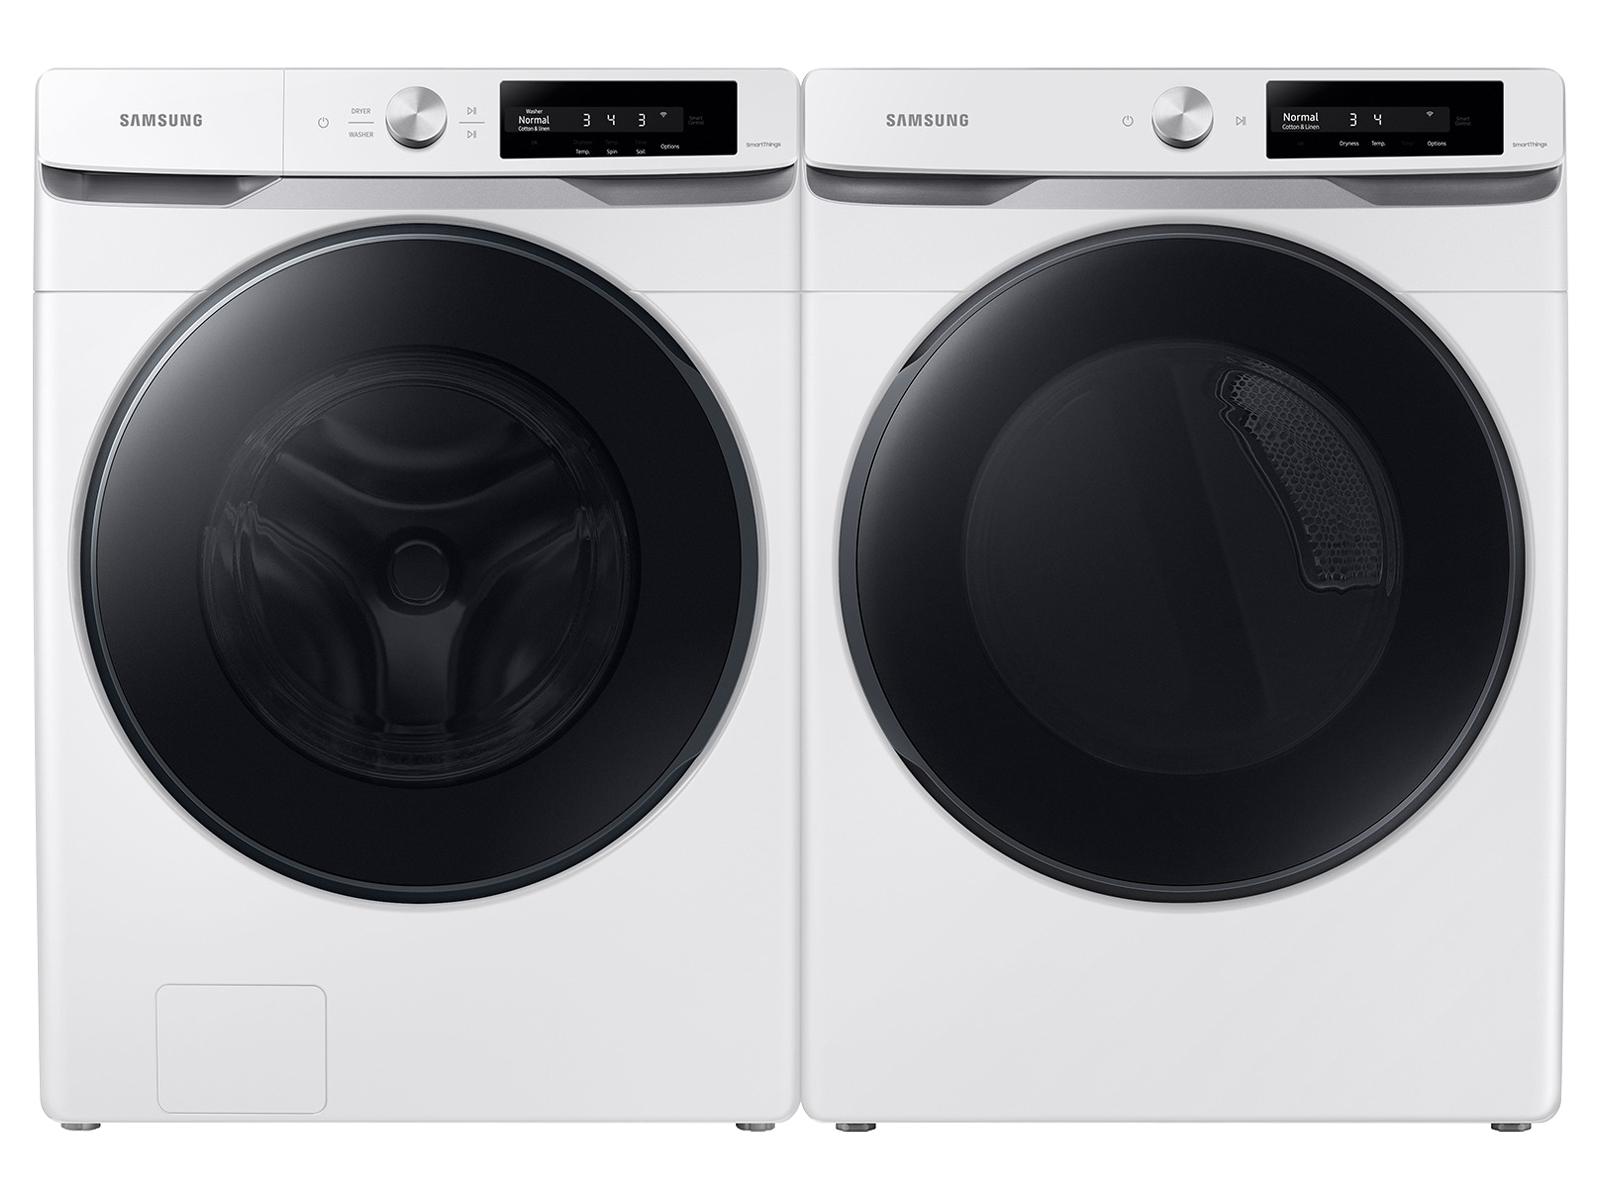 Samsung Smart Dial Front Load Super Speed Wash Washer and Smart Dial Super Speed Dry Electric Dryer package in White(BNDL-1634854755661)